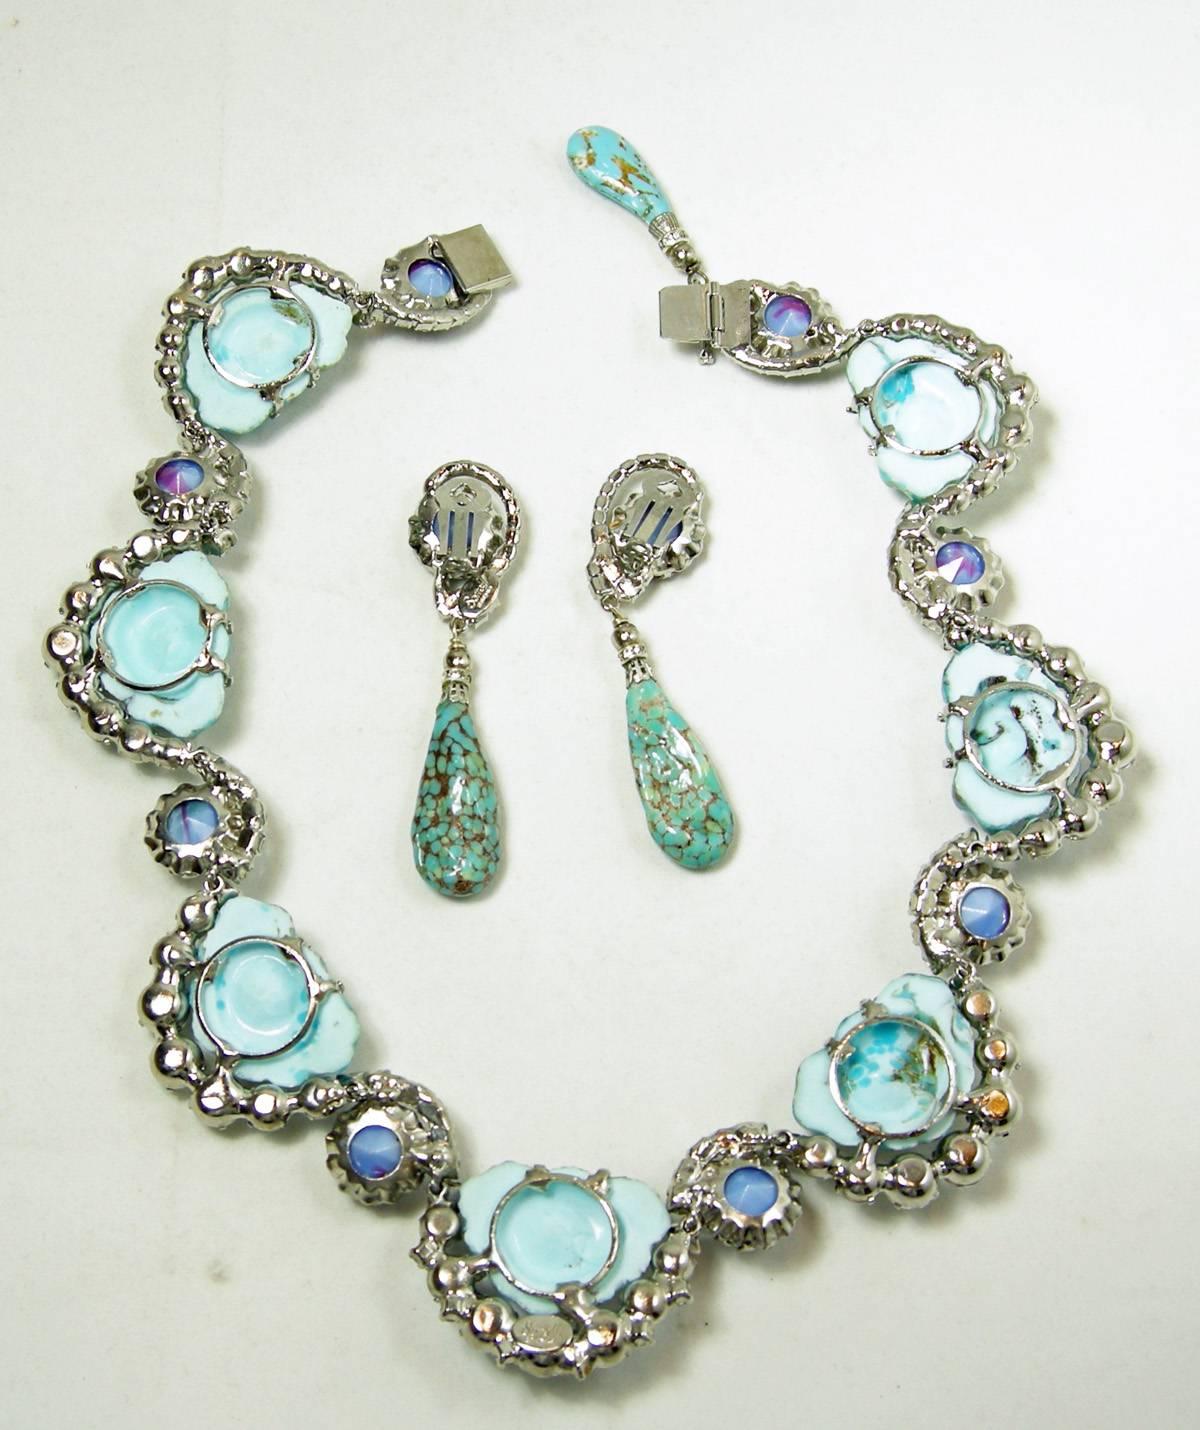 This is a wonderful “one-of-a-kind” necklace and earrings set made for Jeweldiva.  It has a scalloped design with 7 faux rock turquoise stones segments surrounded with brilliant crystals.  In-between each scallop segment are pronged set merlot